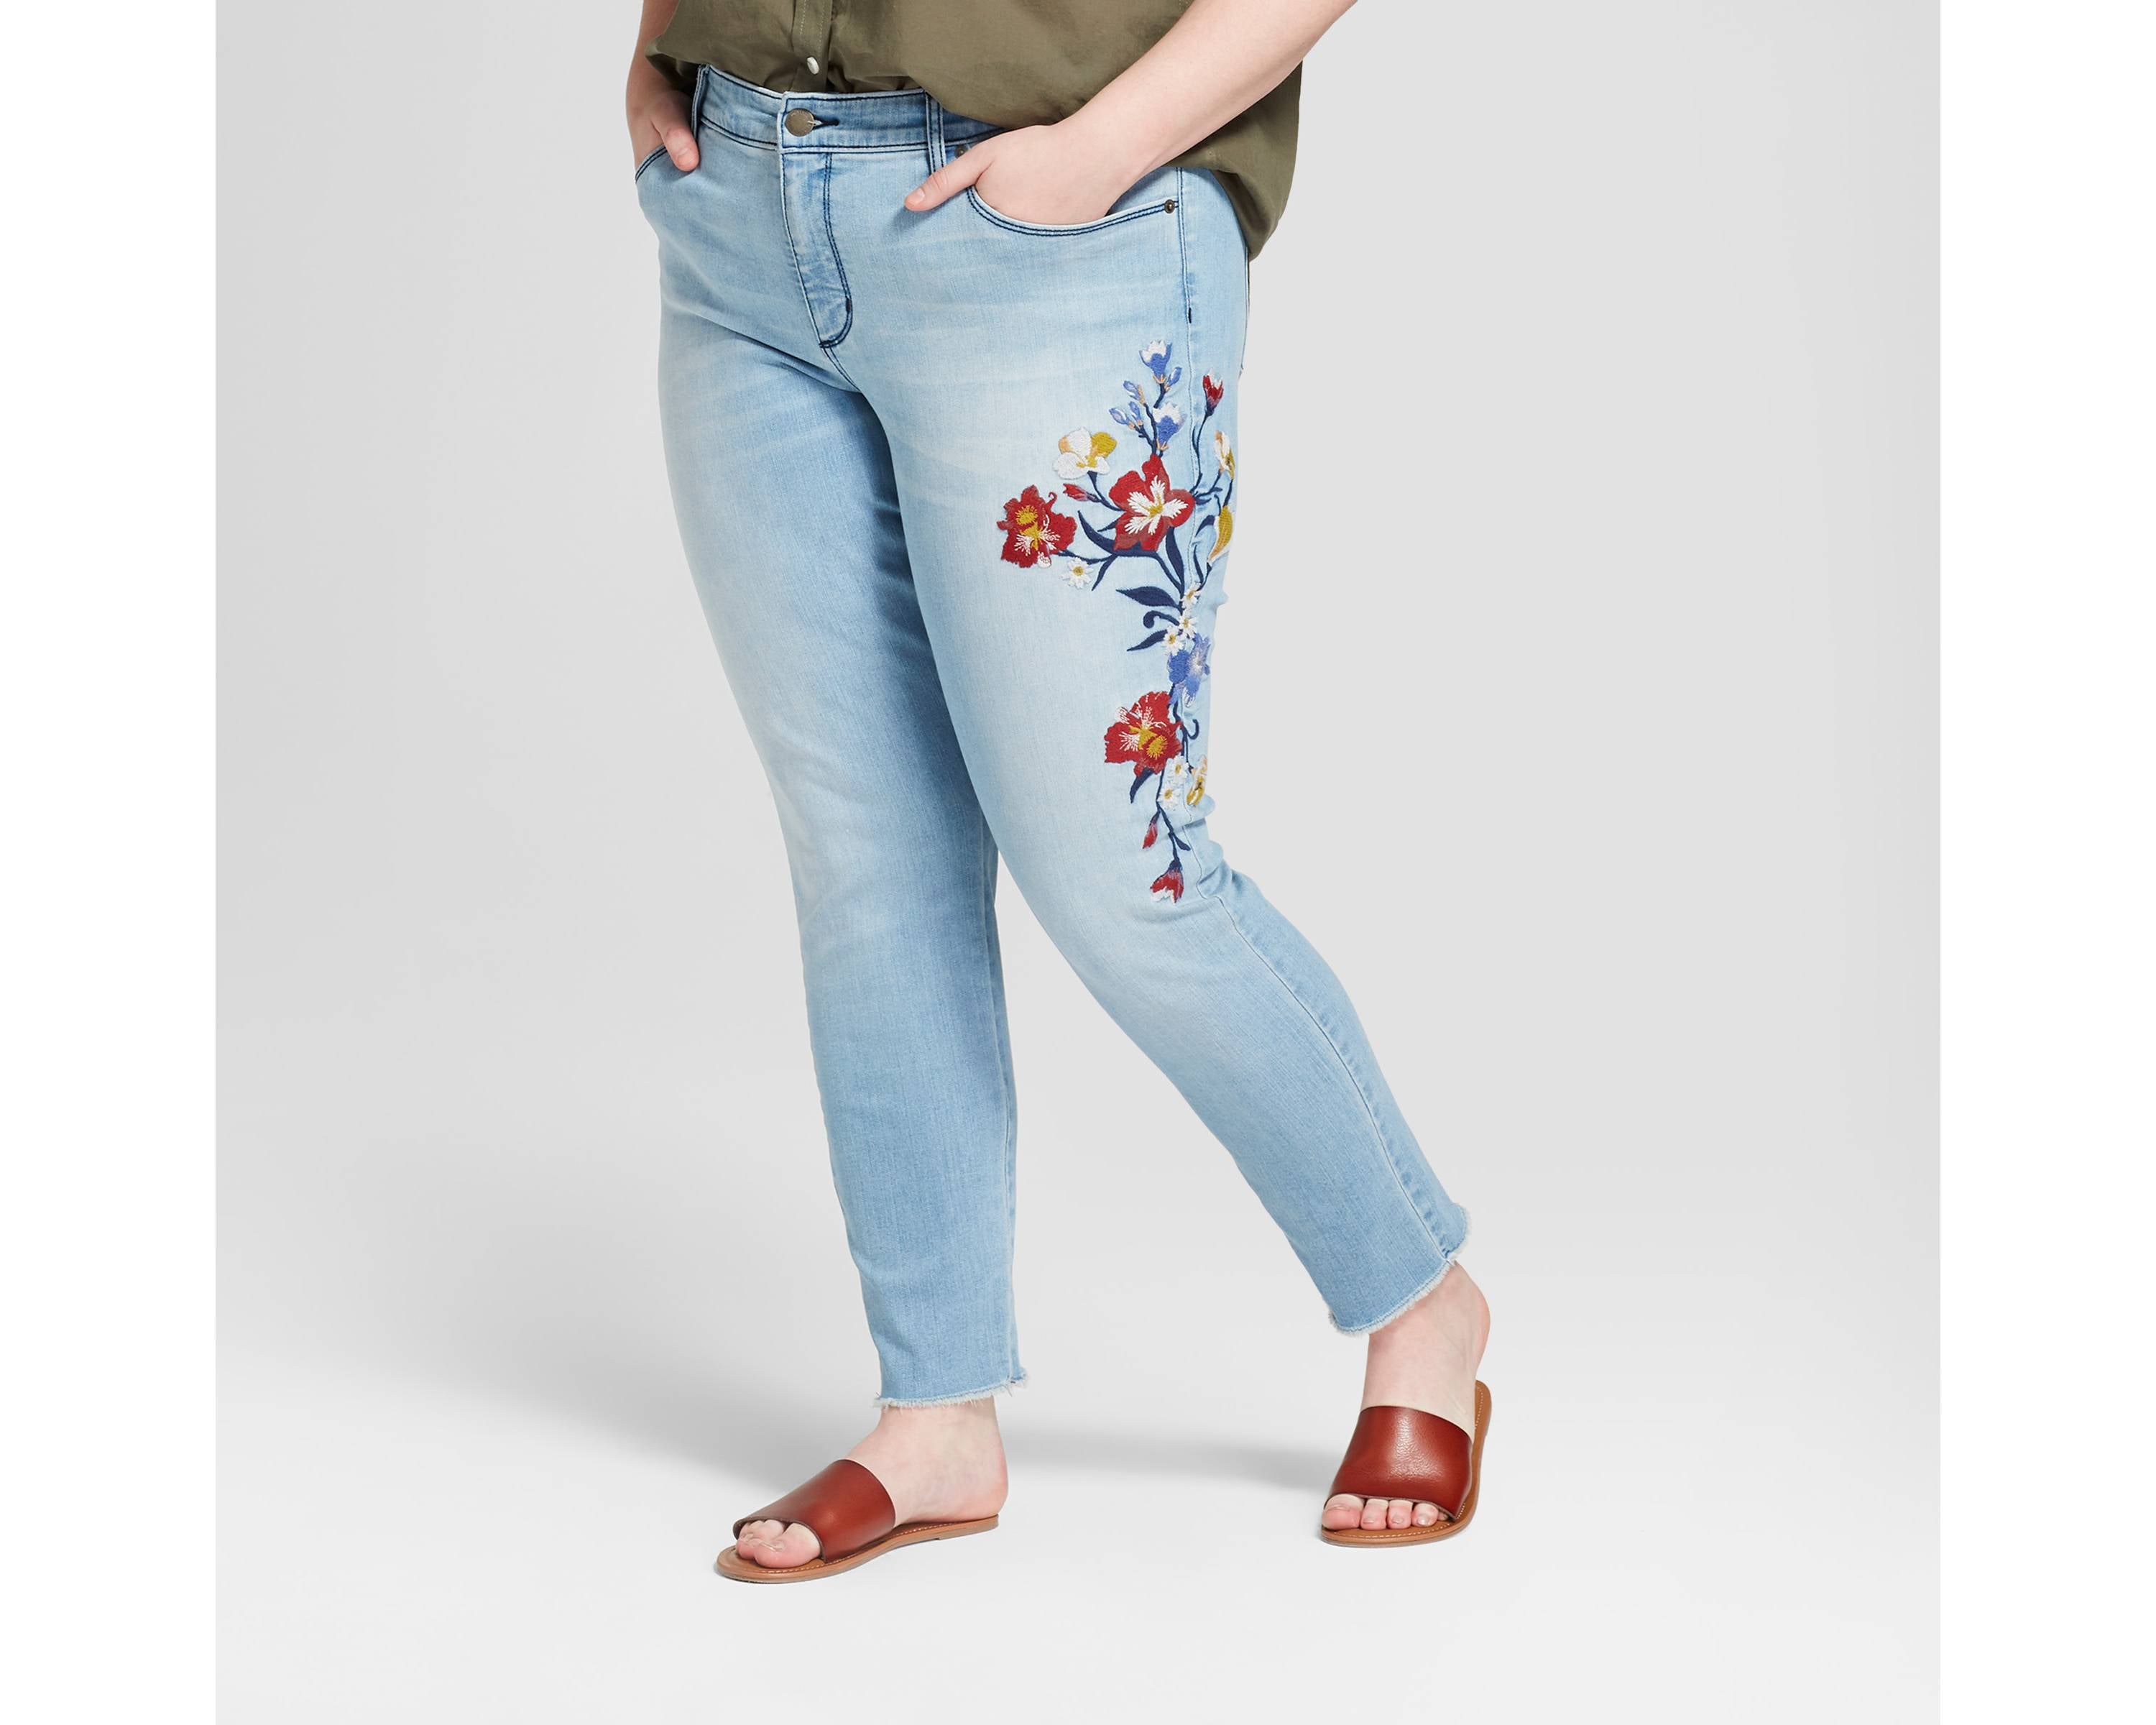 Universal Thread Is Target's Answer To Inclusive Denim and Style